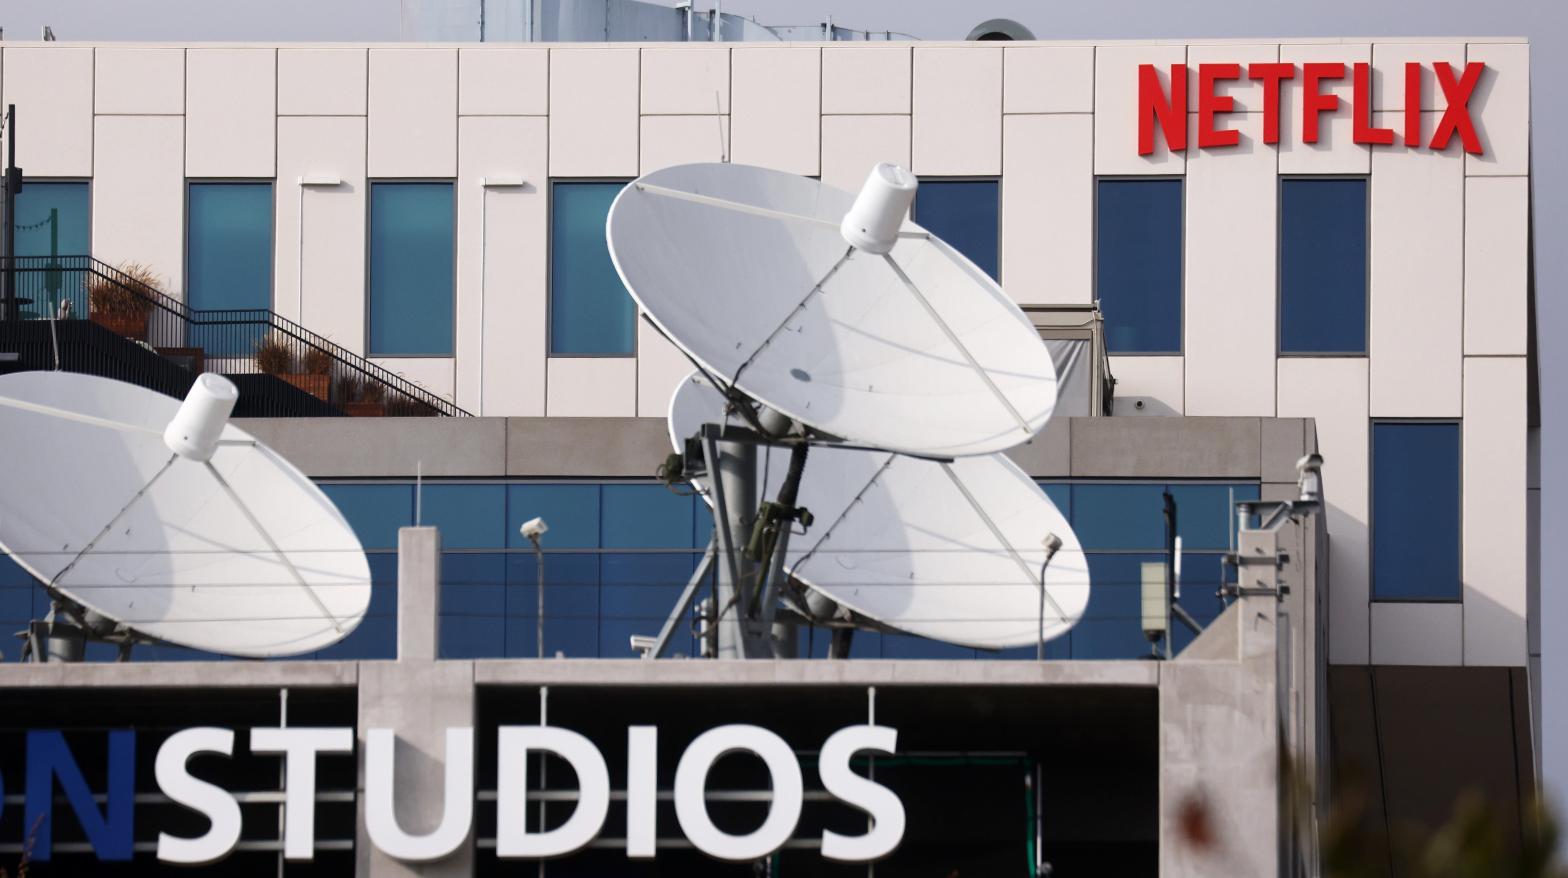 The Netflix logo is displayed at Netflix's Los Angeles headquarters on October 07, 2021 in Los Angeles, California. (Photo: Mario Tama, Getty Images)